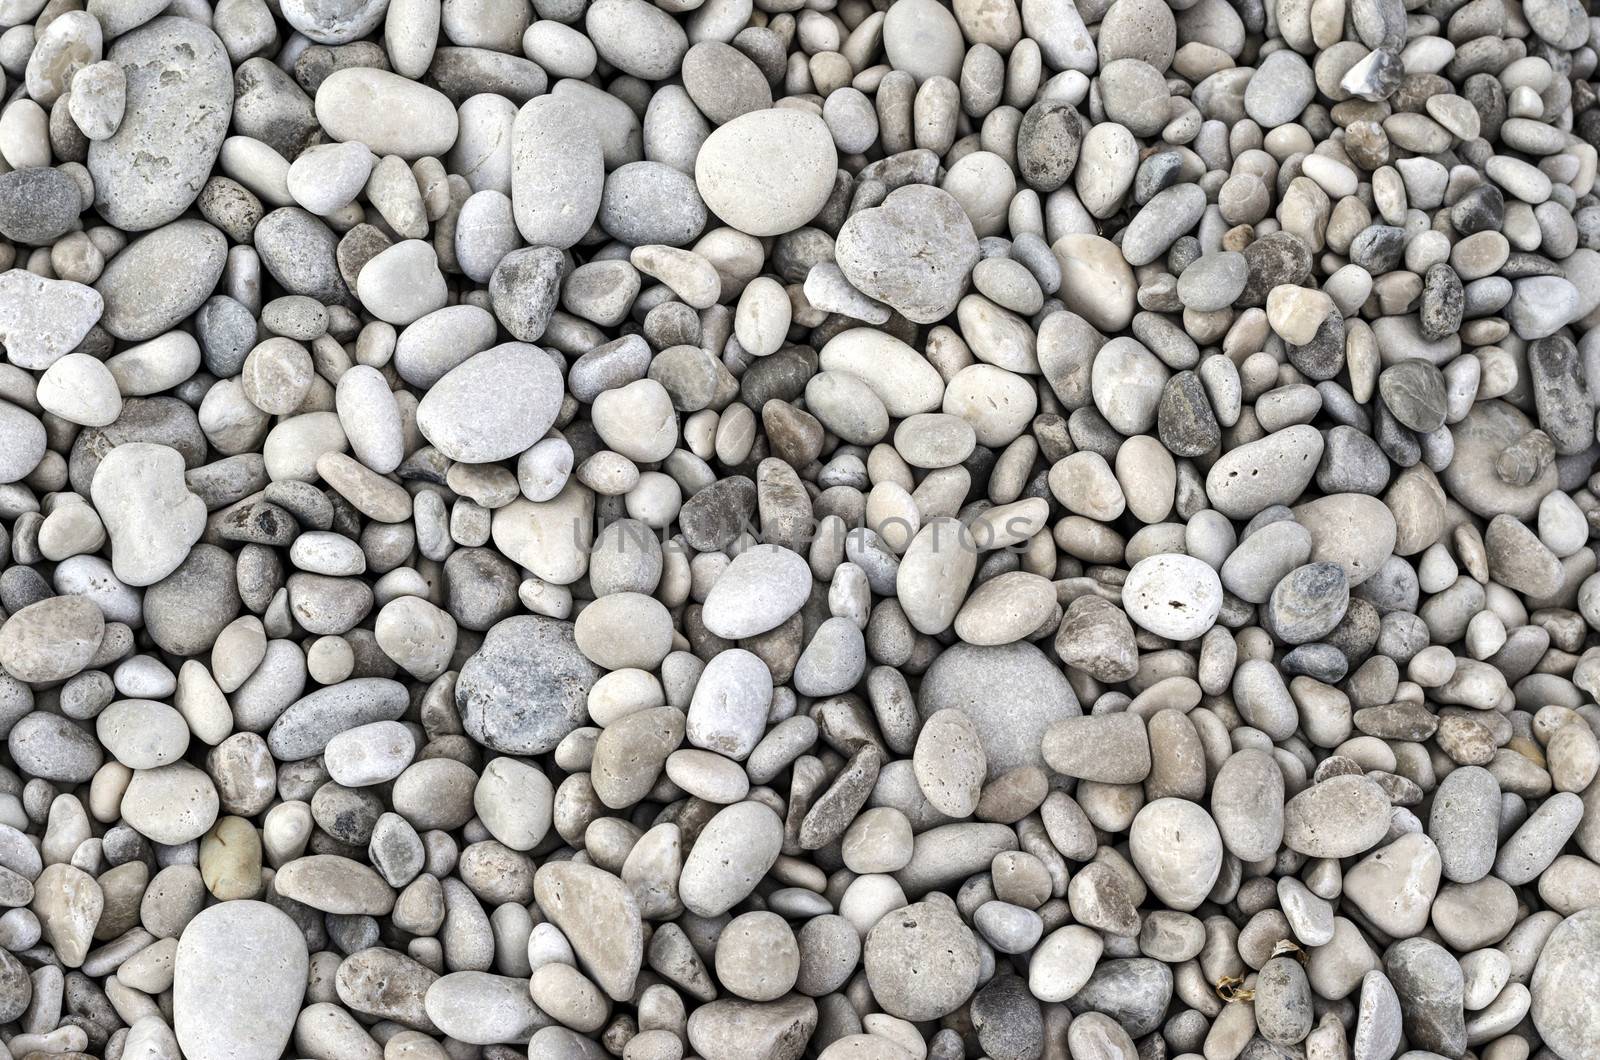 Texture of pebbles from a beach shore.